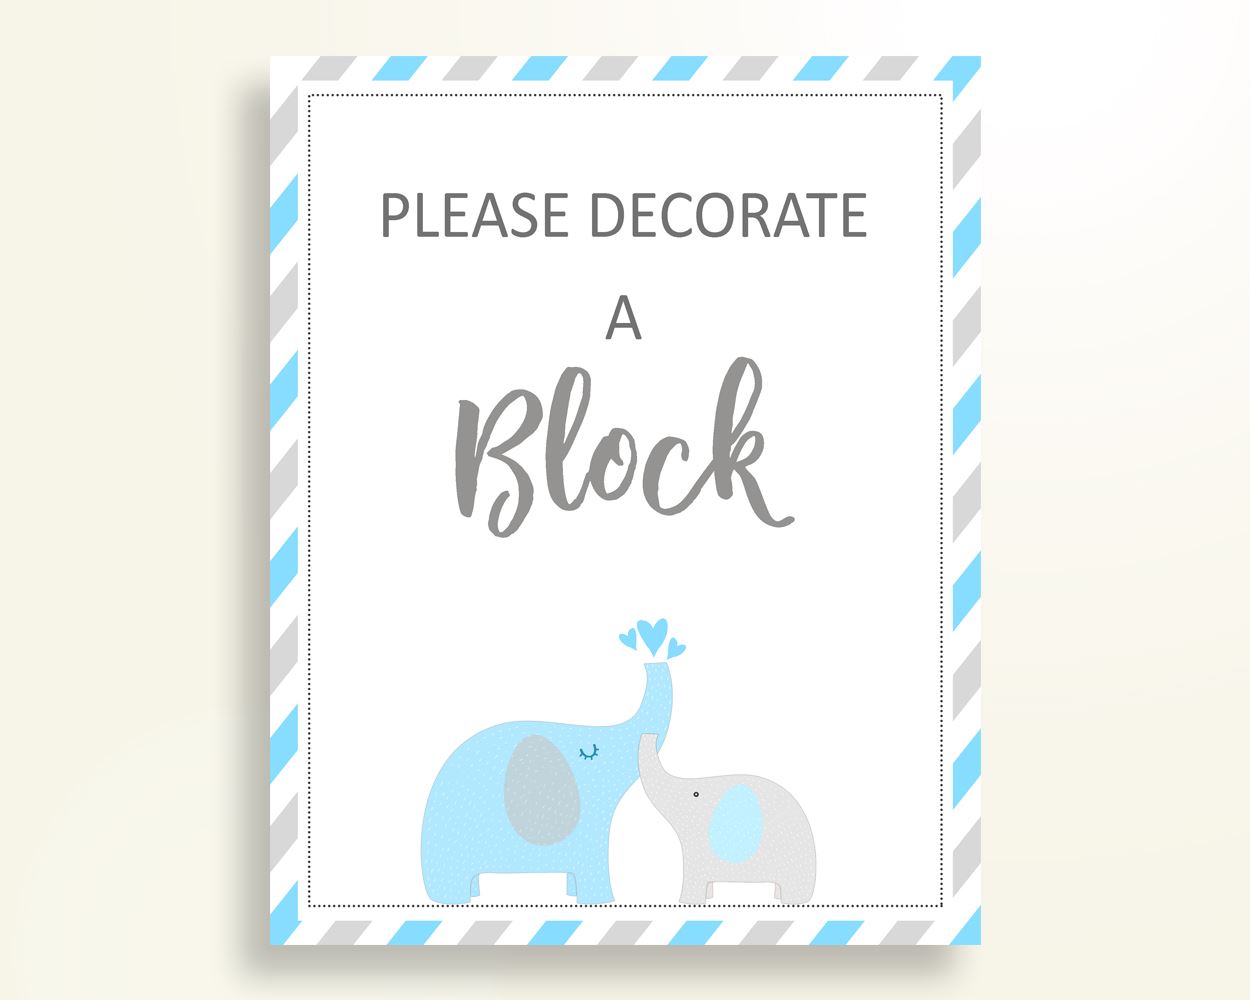 Sign A Block Baby Shower Decorate A Block Elephant Baby Shower Sign A Block Blue Gray Baby Shower Elephant Decorate A Block prints C0U64 - Digital Product